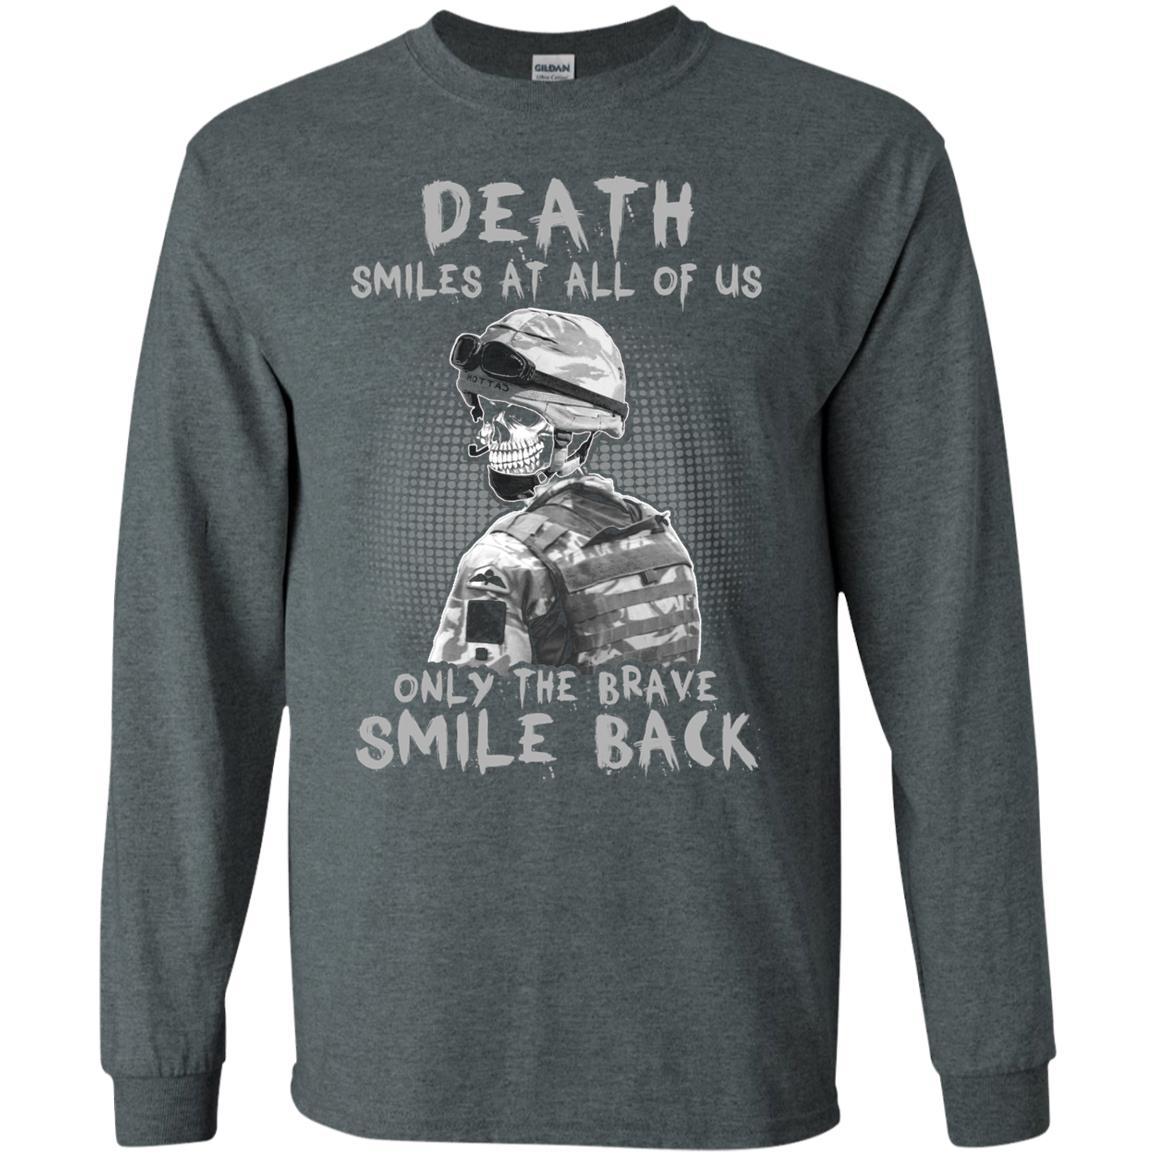 Military T-Shirt "Death Smiles At All Of Us - Only the Brave Smiles Back Men On" Front-TShirt-General-Veterans Nation